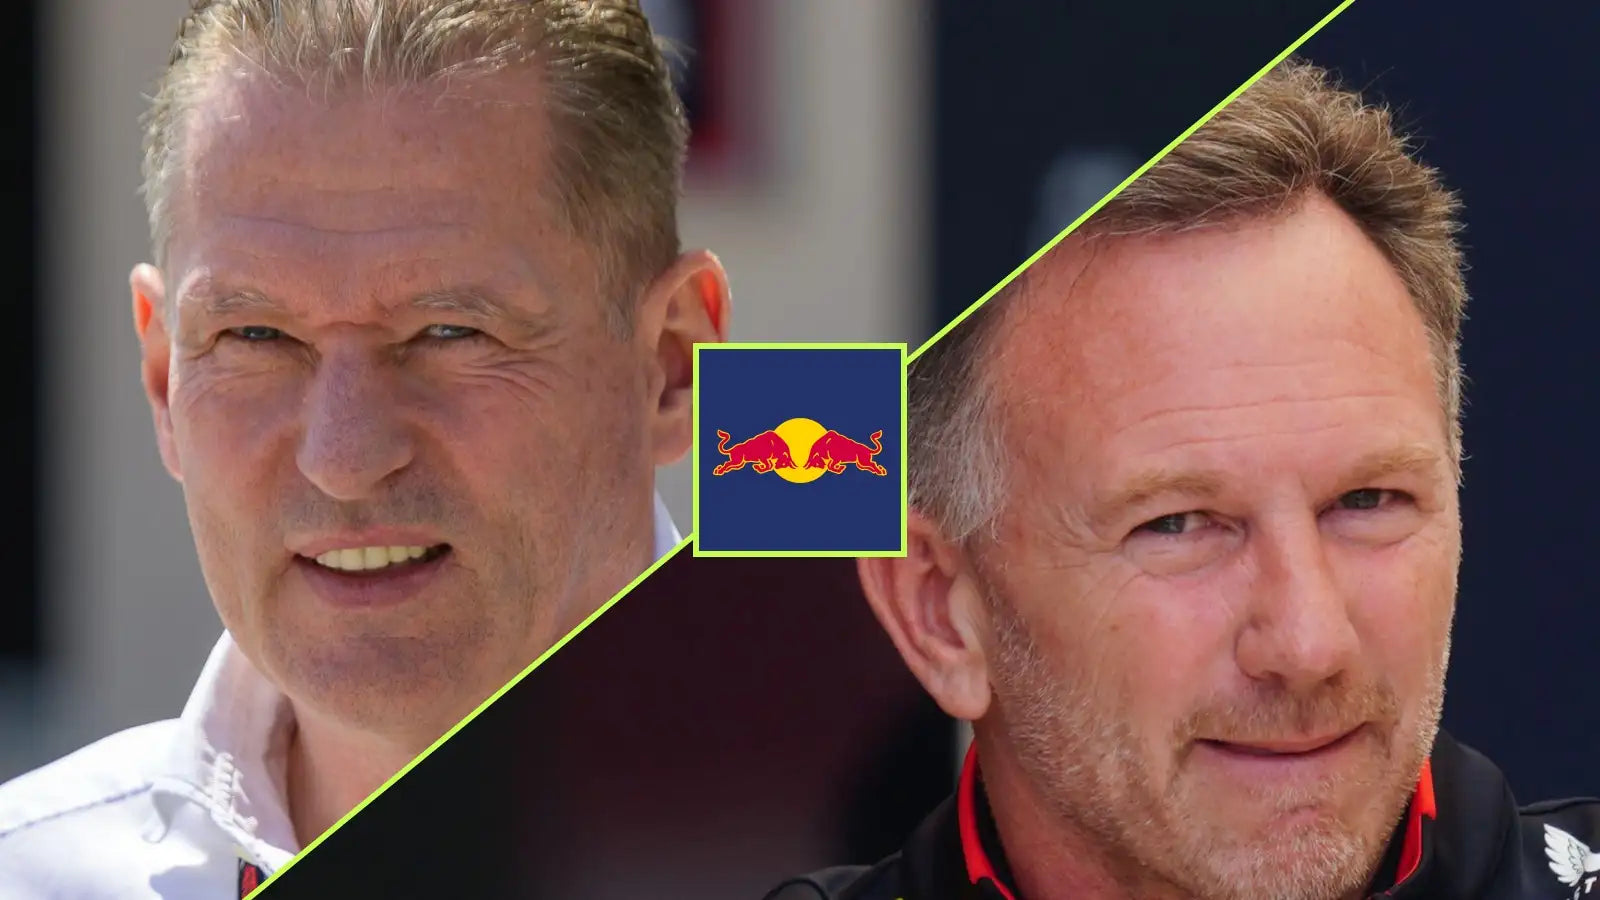 Red Bull’s internal war: Christian Horner is under attack and rivals are ready to pounce